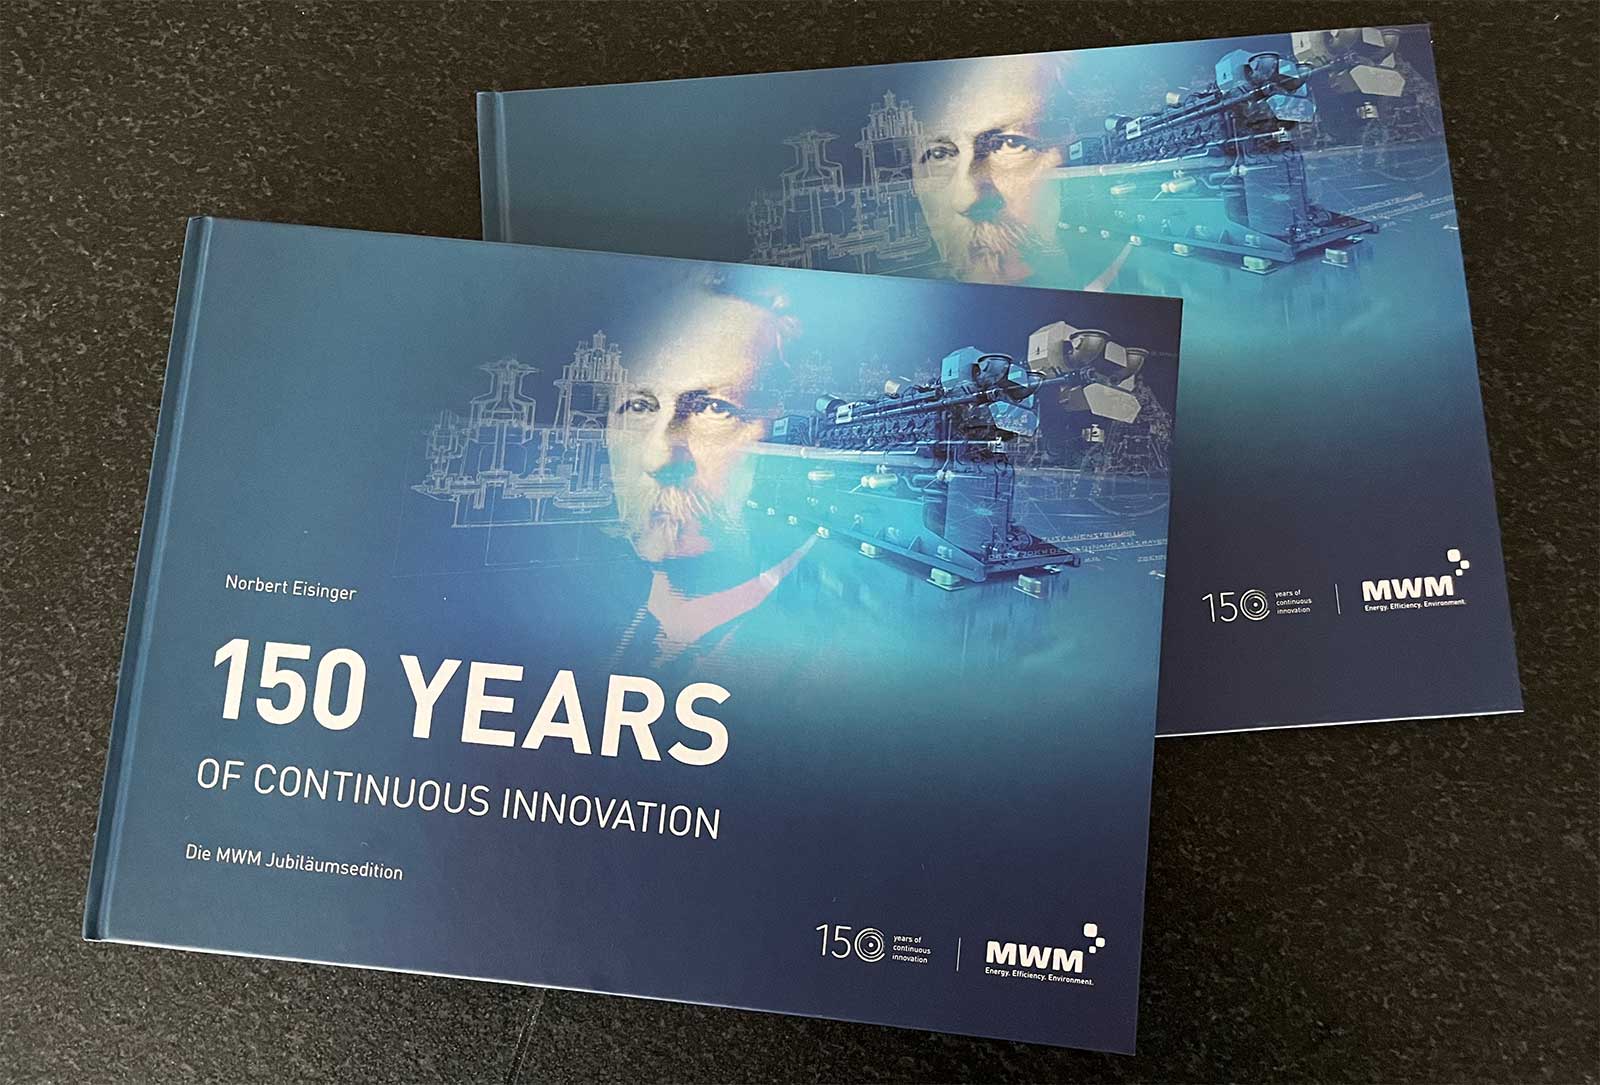 The Brand Anniversary Book: "150 Years of Continuous Innovation"